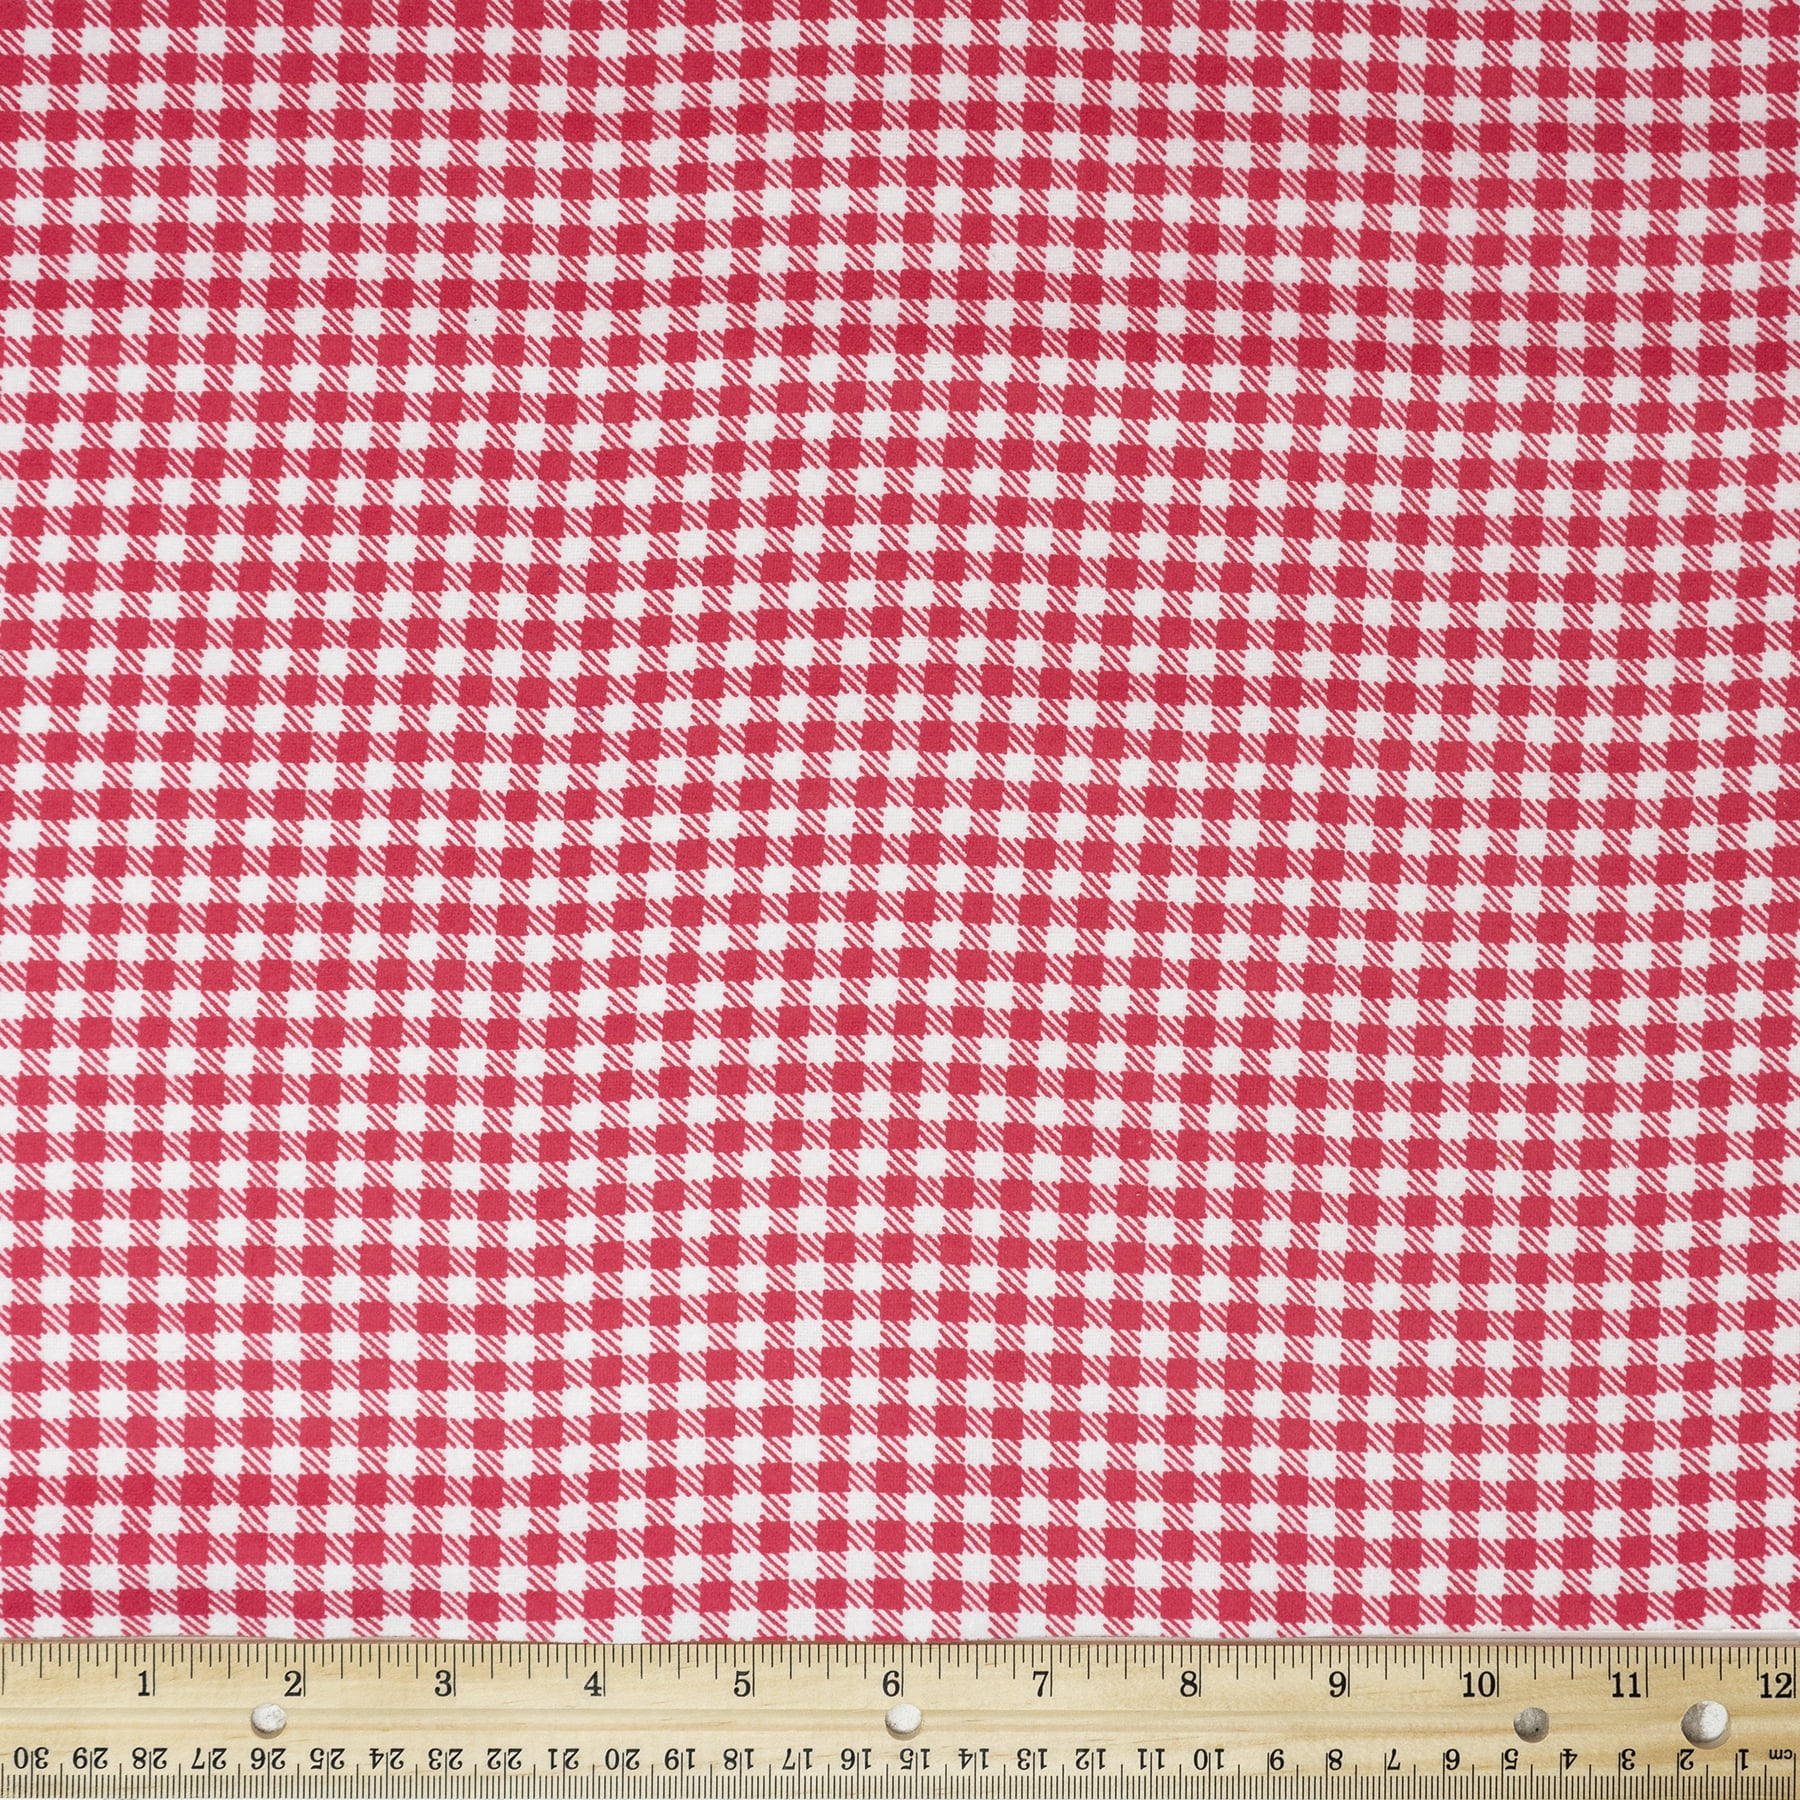 RTC Fabrics 42/43 100% Cotton Flannel Crafting Fabric by the Yard, Solid  Cream 